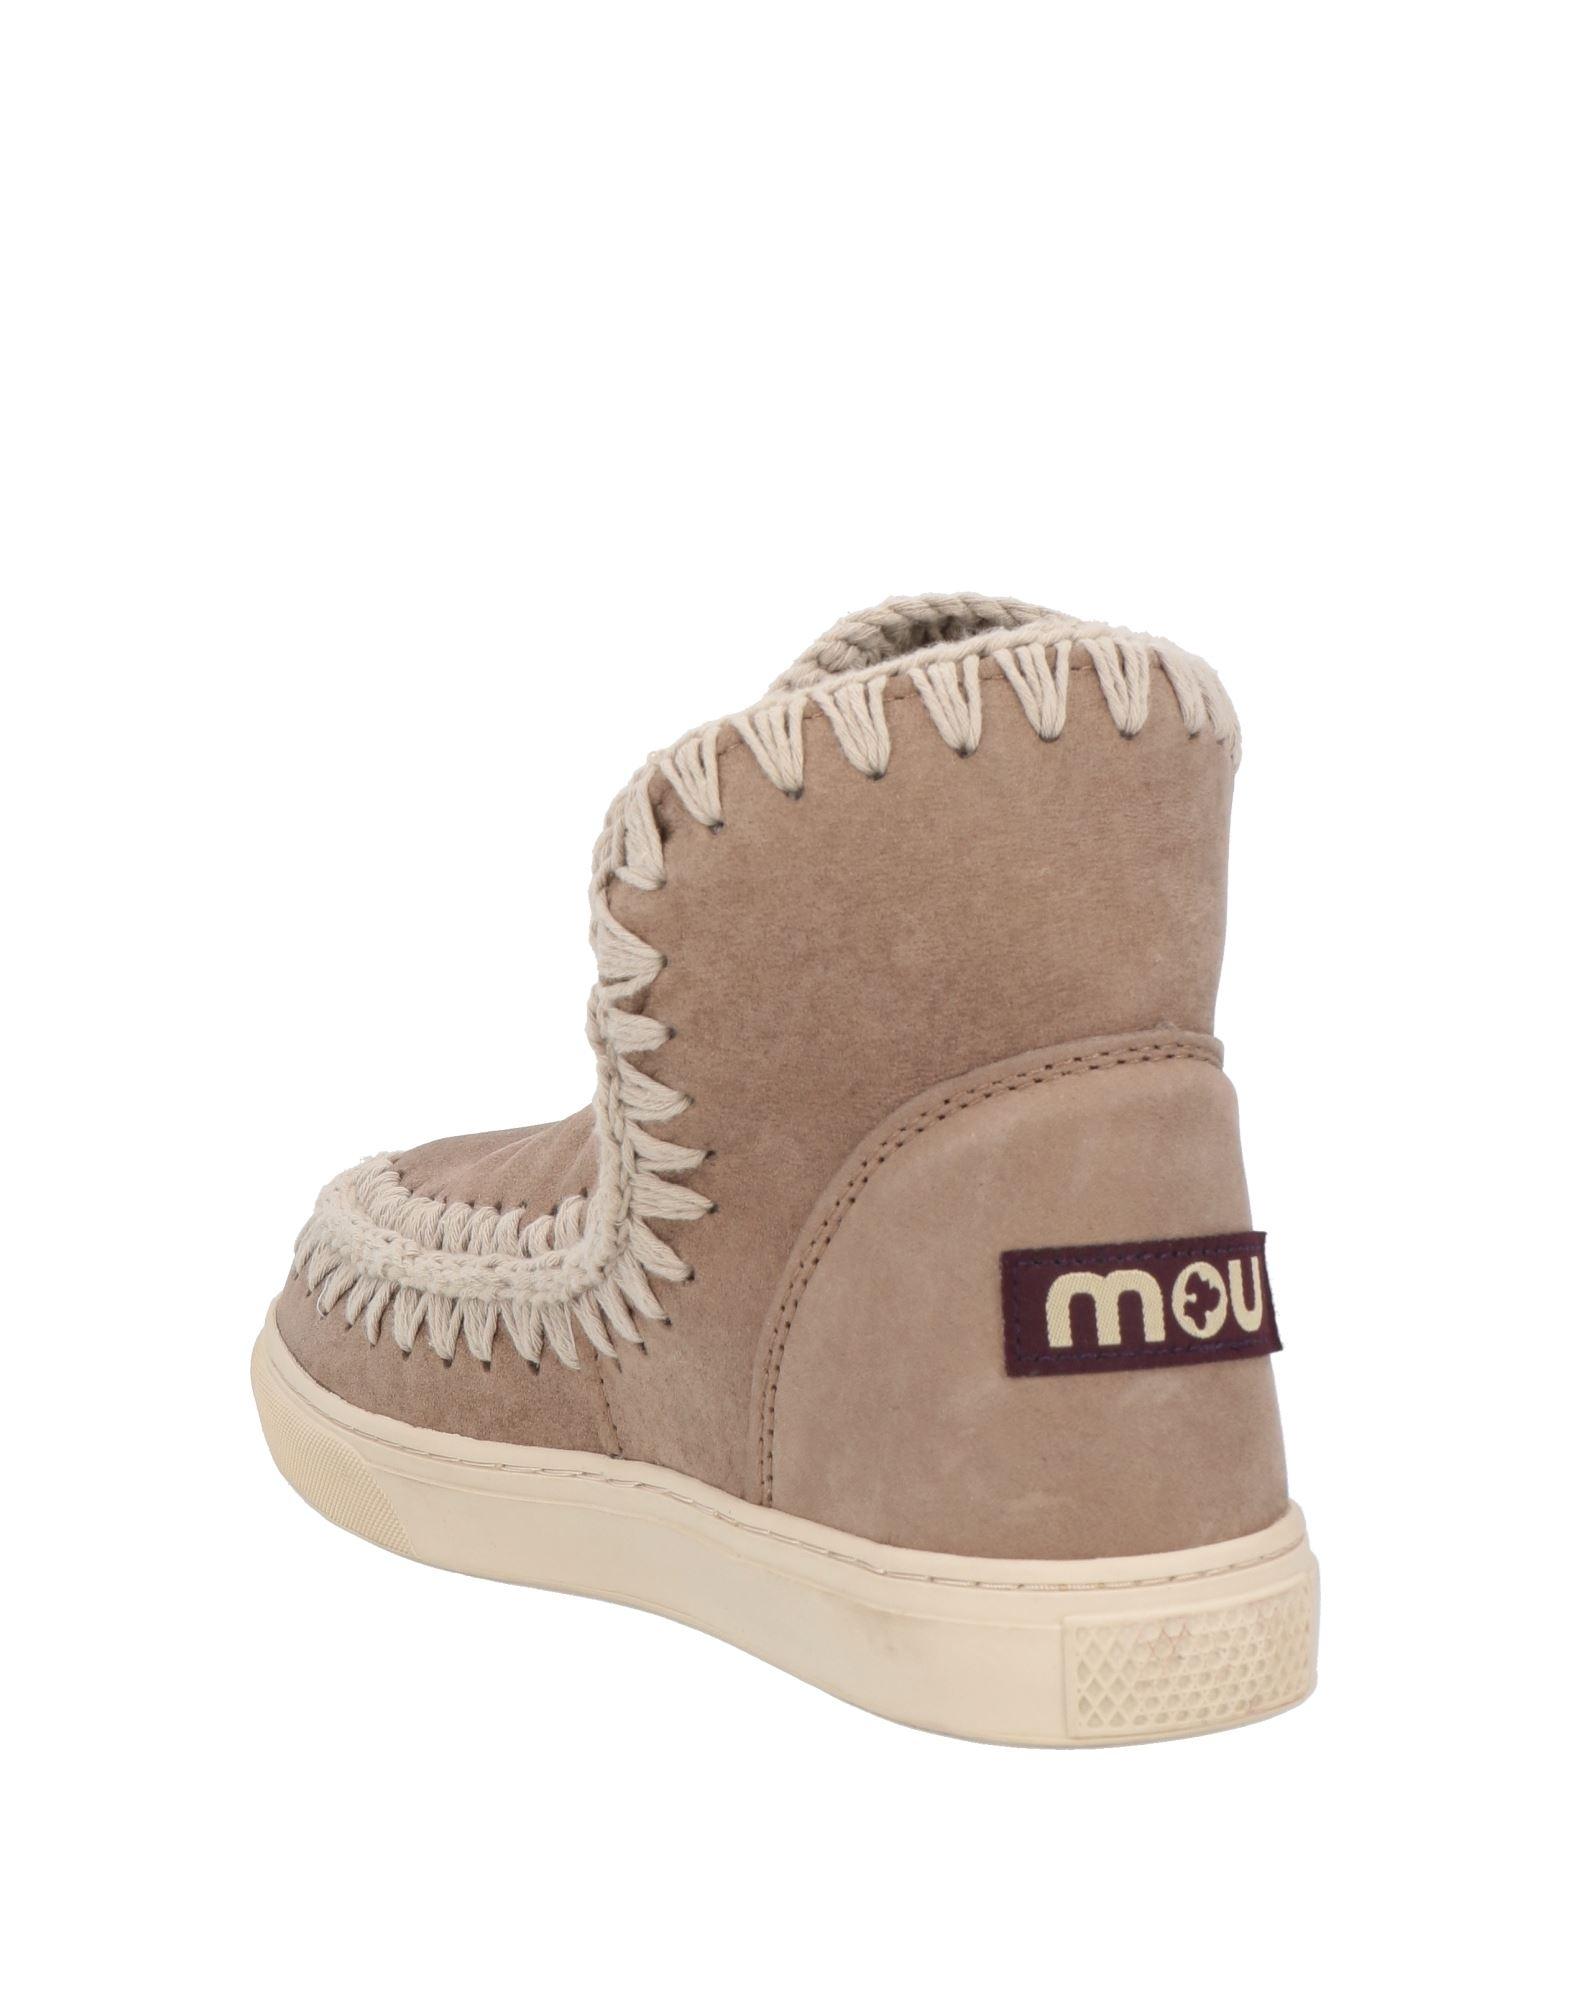 Mou Ankle Boots in Natural | Lyst